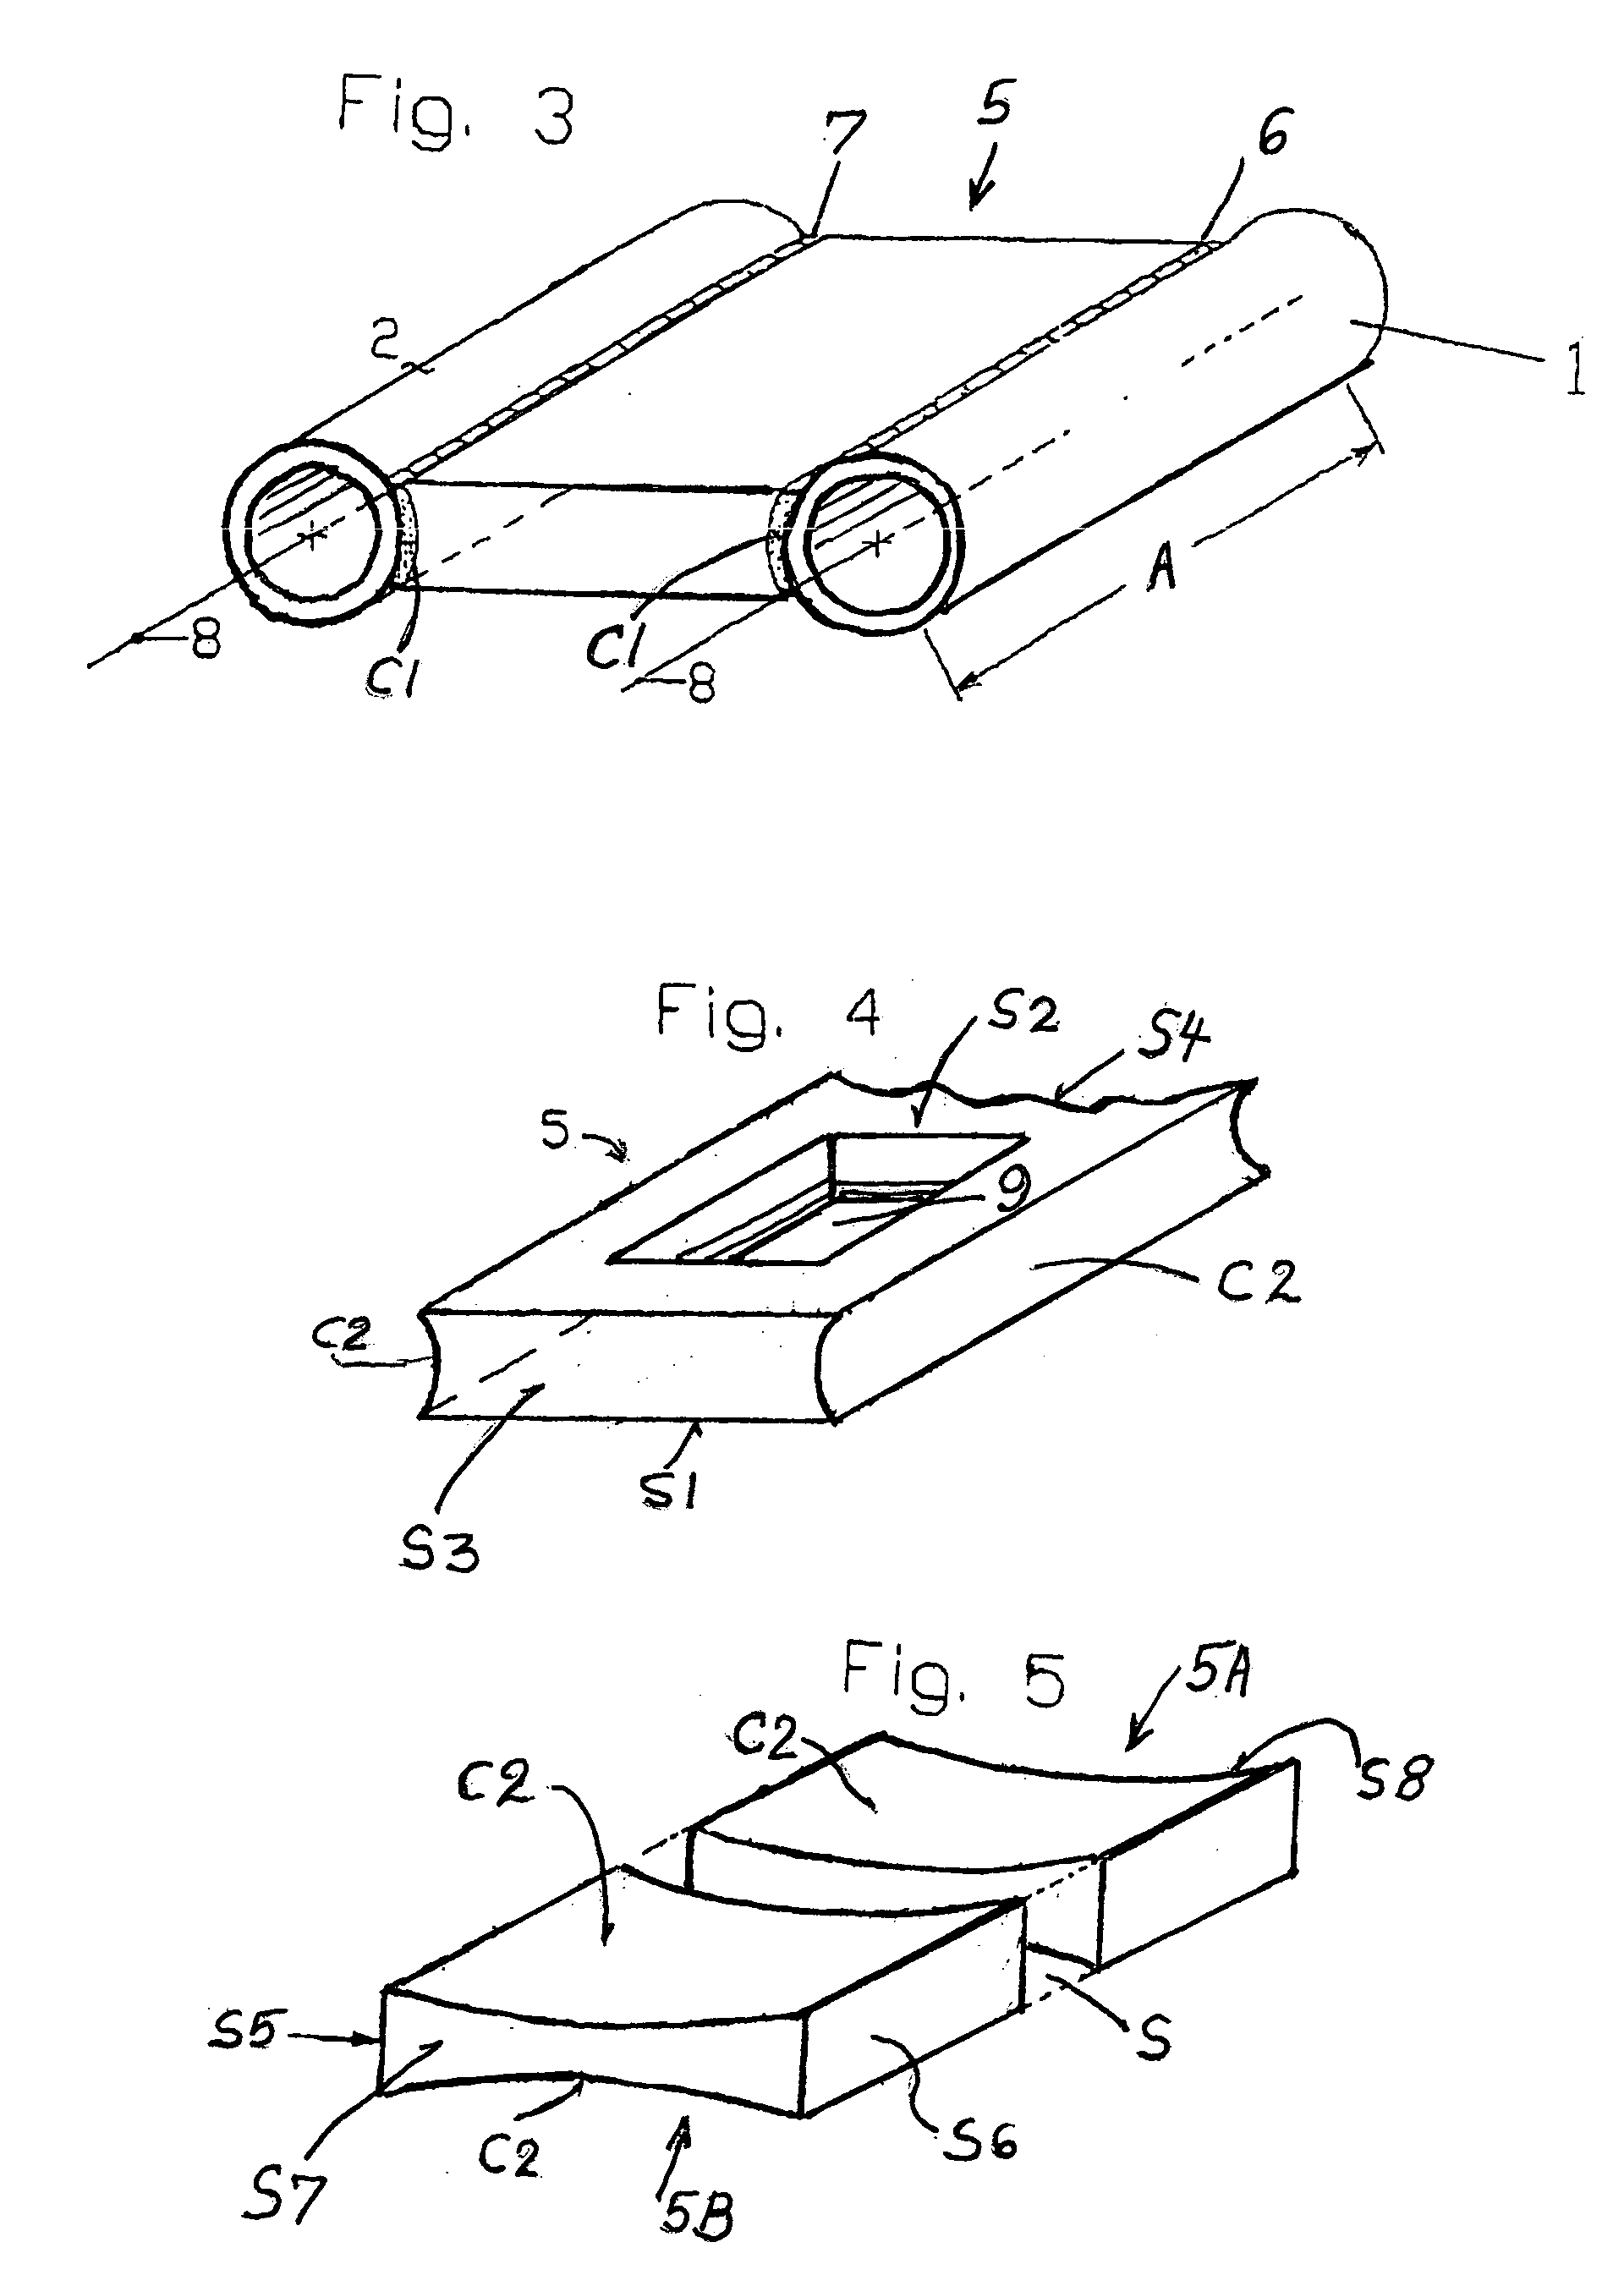 Protection hose arrangement for conductors installed in an aircraft